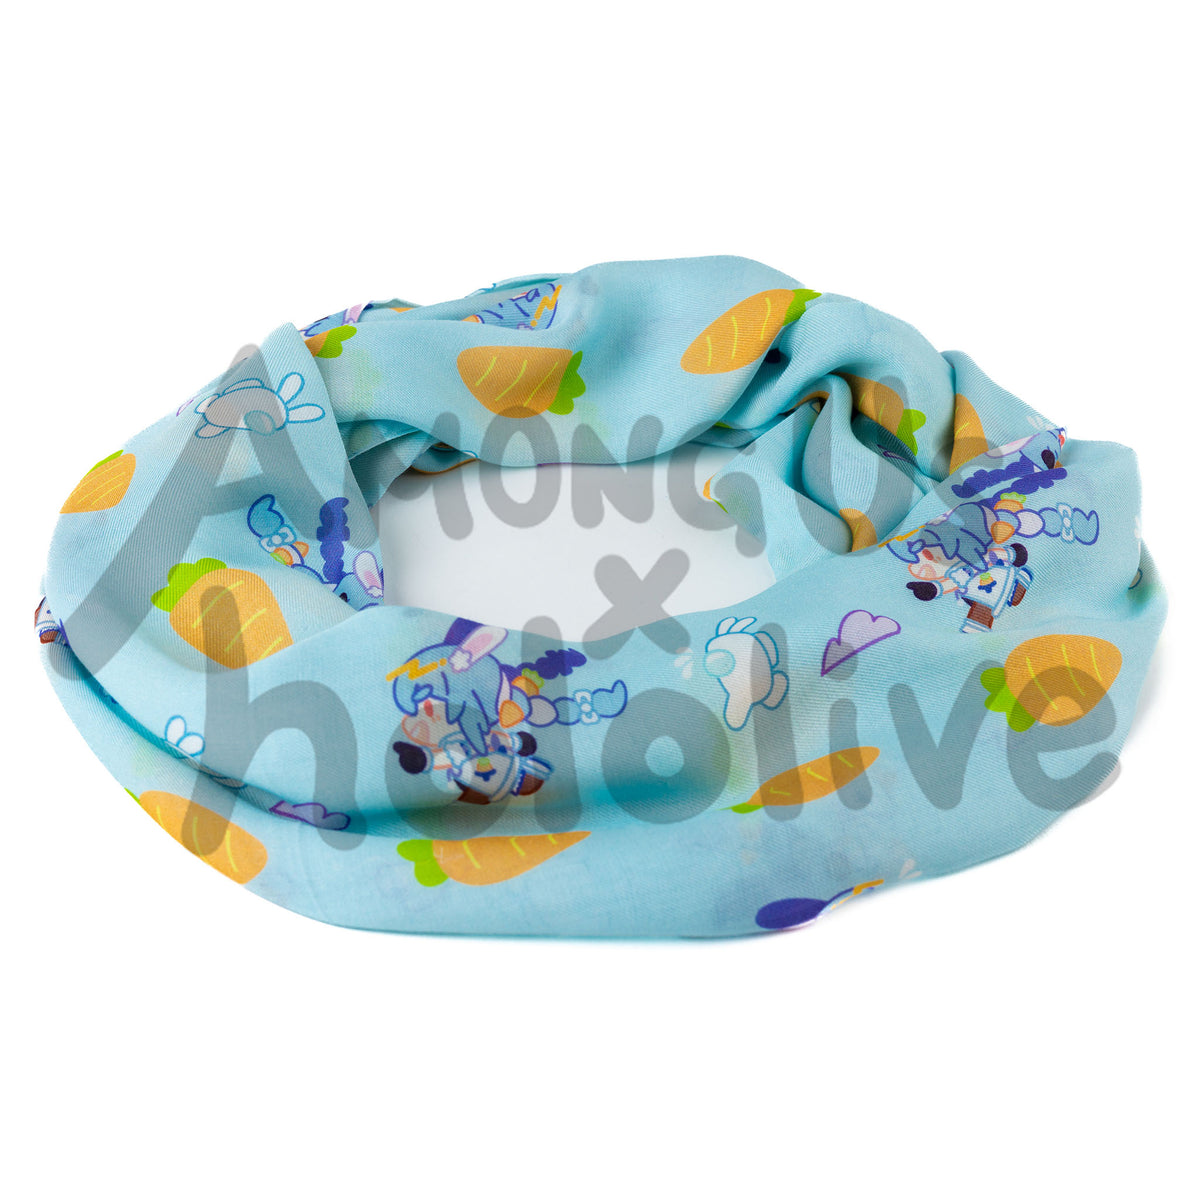 Product image close up of the pekora Scarf in a donut shape. The light blue scarf features a lined pattern of Pekora from hololive running back and forth. There is a white Crewmate with bunny ears chasing her with little zoom SFX behind it. There are also carrots placed side by side in a line to break up the pekora running pattern. 